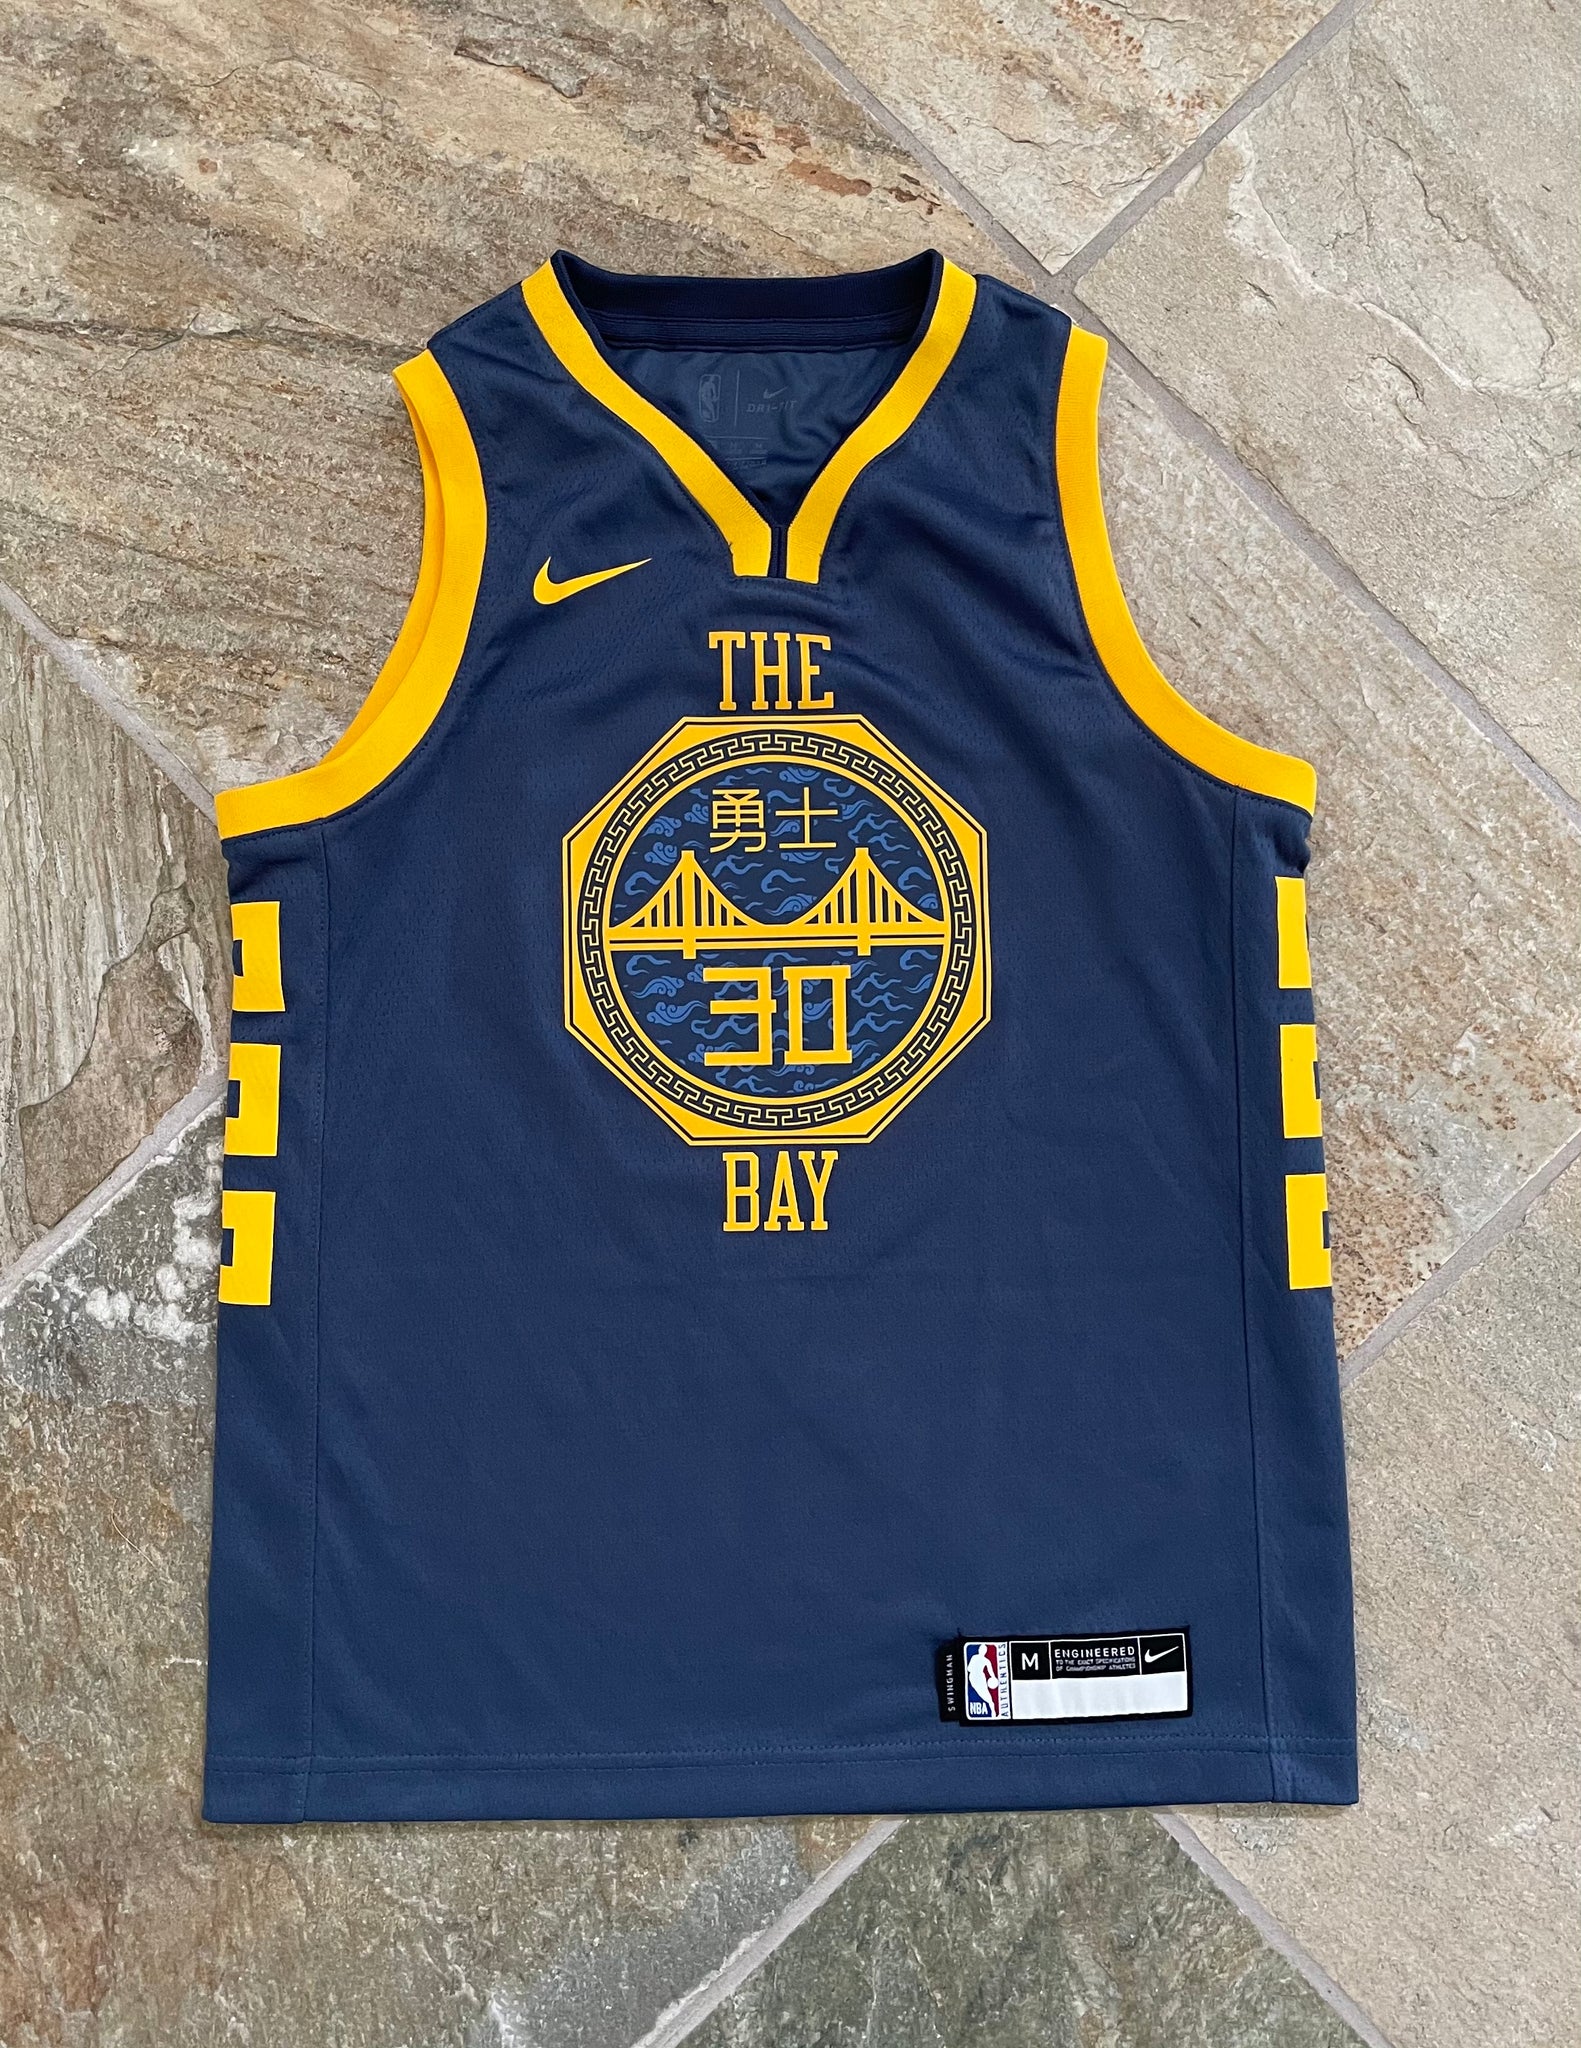  Stephen Curry Youth Jersey